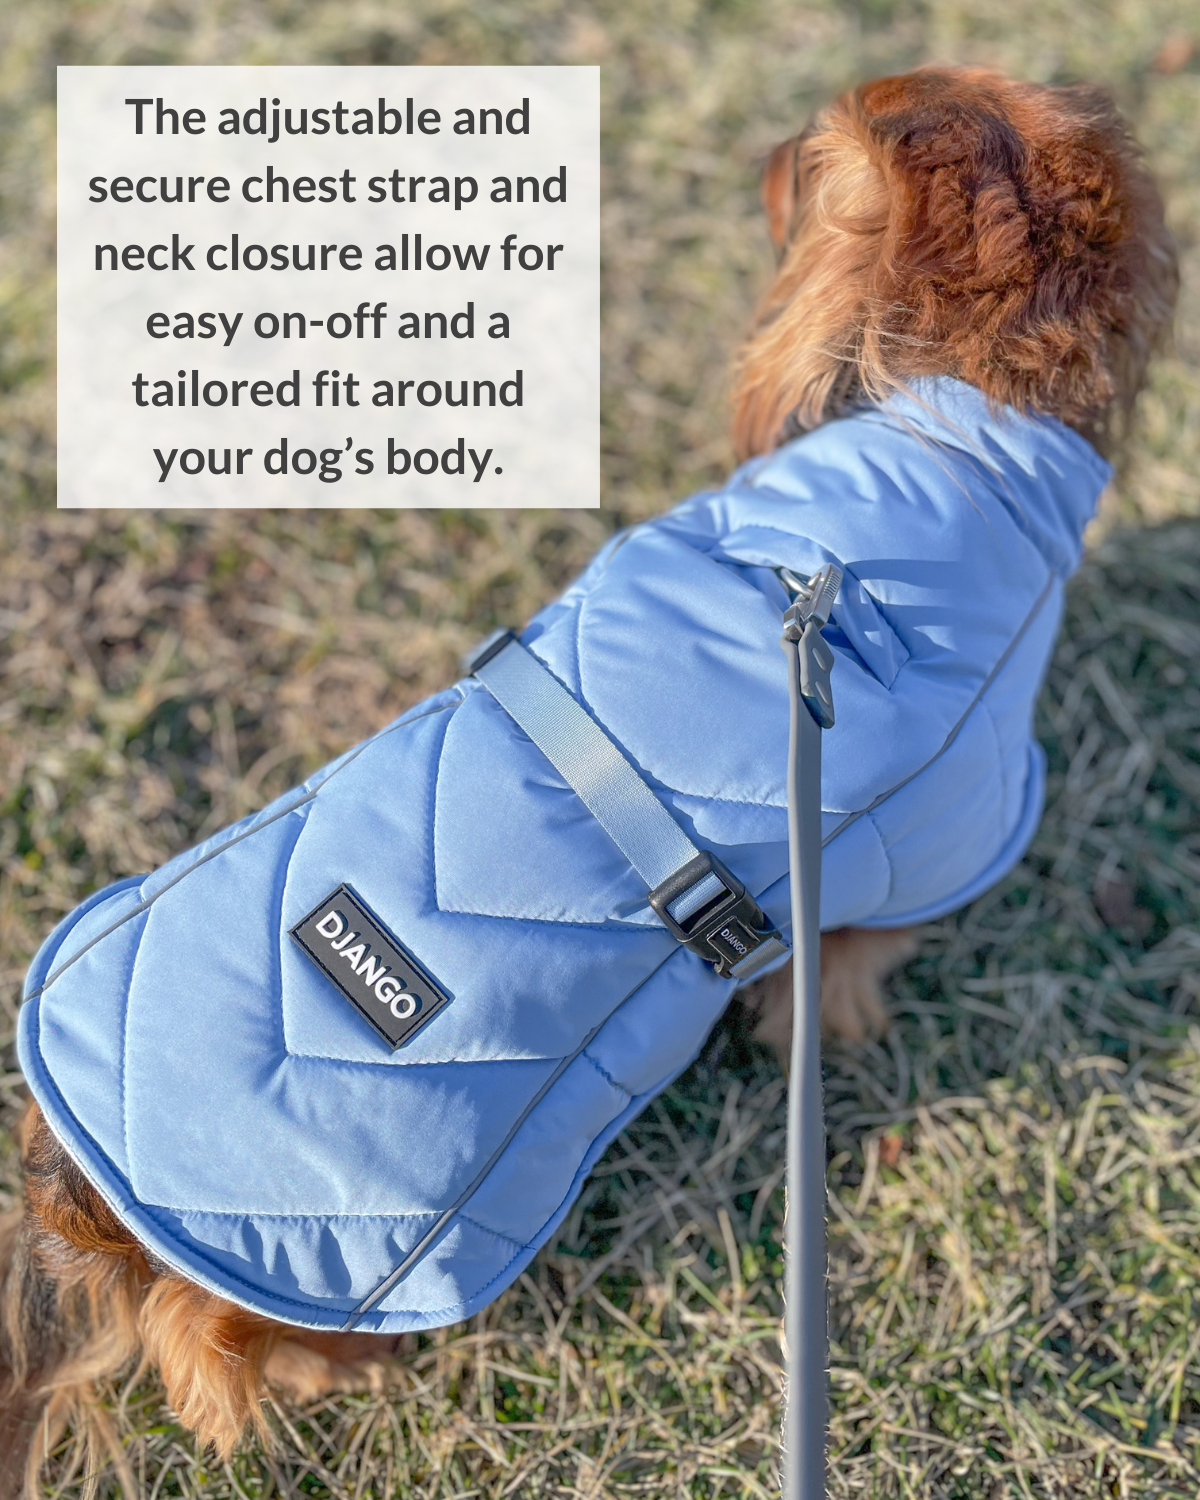 This adjustable puffer coat for dogs features a secure chest strap and adjustable velcro for easy on and off. The adjustable dog coat chest strap allows the whistler winter dog coat to be tailored to your dog’s body. - djangobrand.com